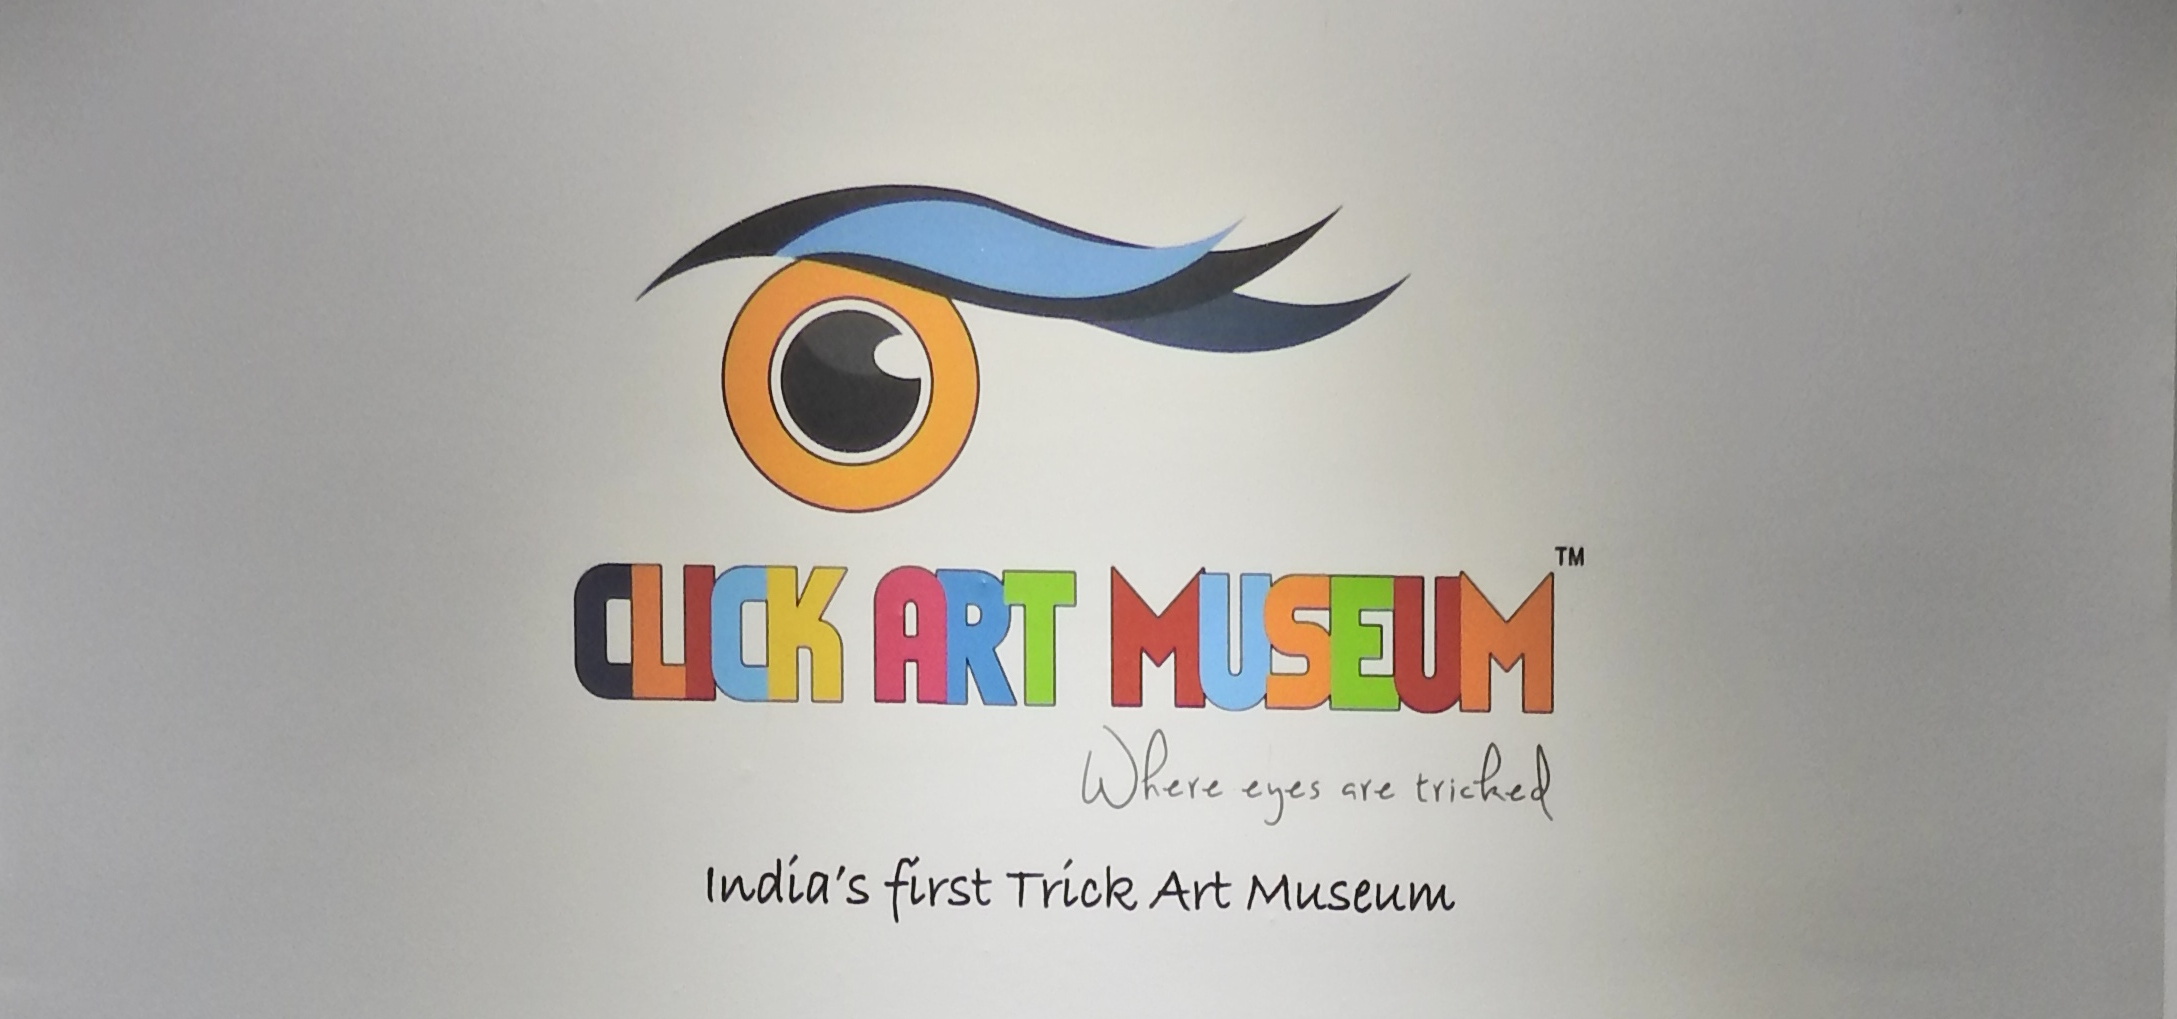 Main logo of the museum